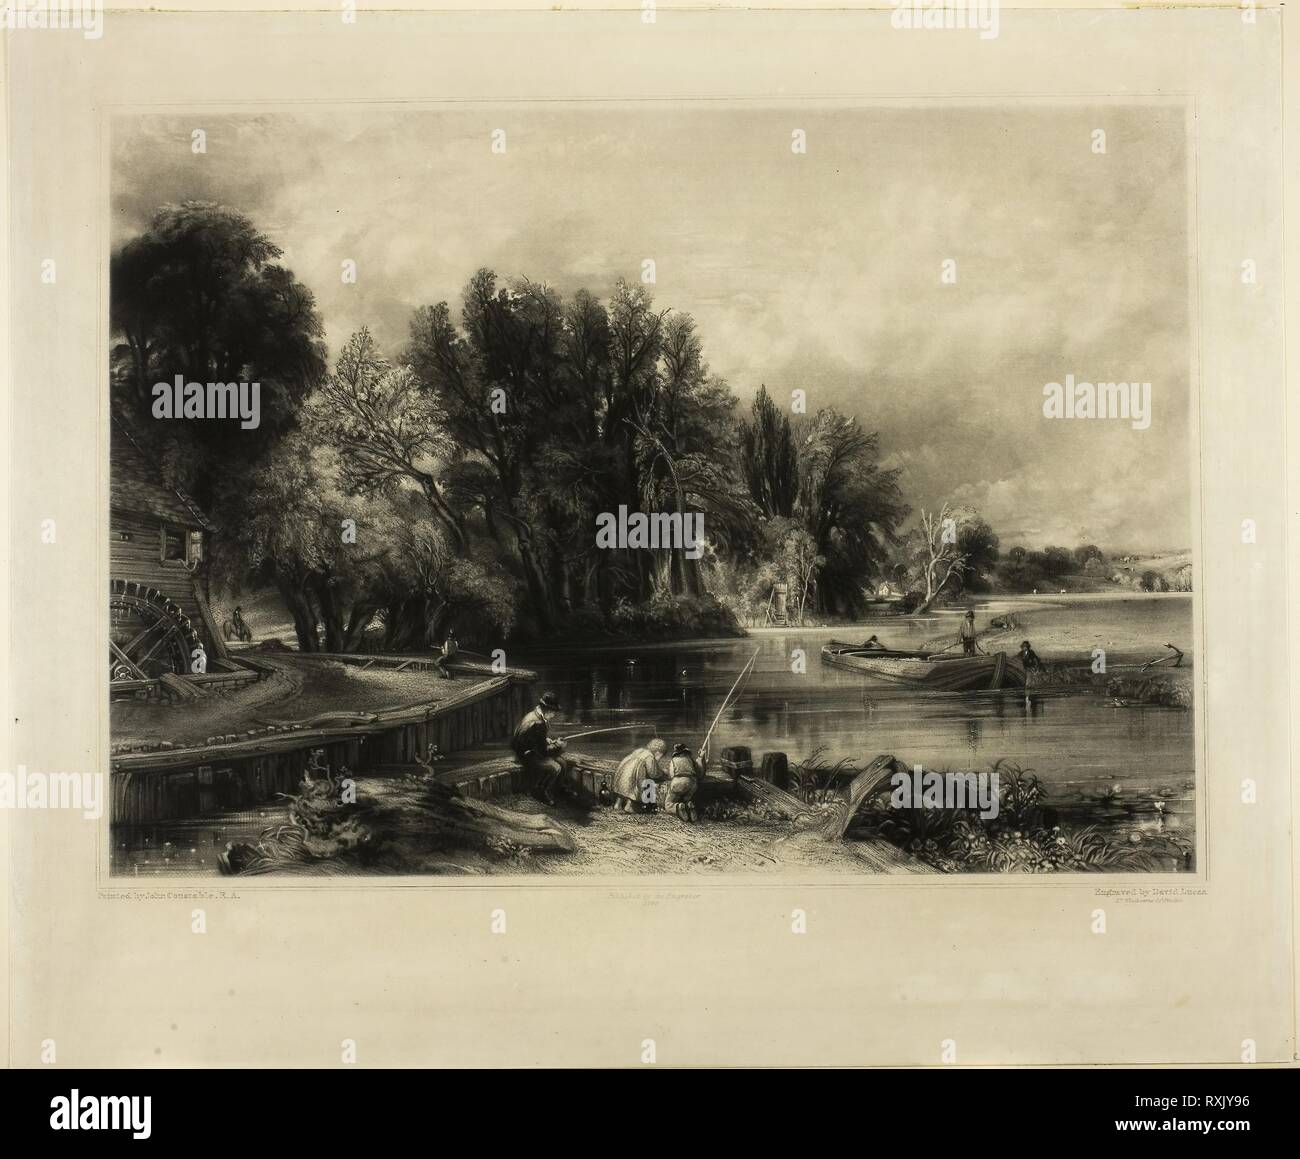 The Young Waltonians. David Lucas (English, 1802-1881); after John Constable (English, 1776-1837). Date: 1840. Dimensions: 297 × 420 mm (image); 412 × 496 mm (sheet). Mezzotint on paper. Origin: England. Museum: The Chicago Art Institute. Stock Photo